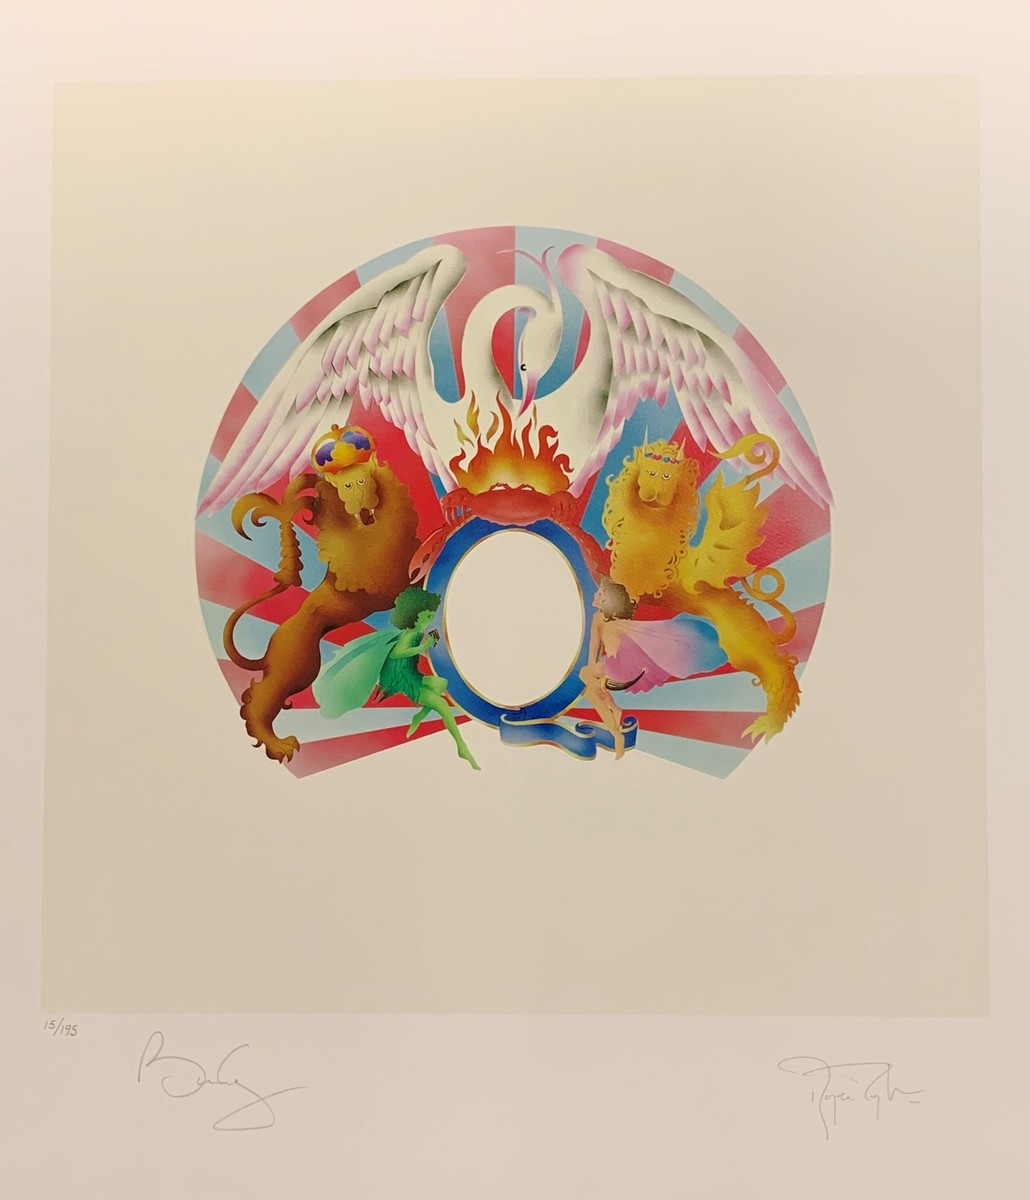 QUEEN - A NIGHT AT THE OPERA - Emprossed Limited Fine Art Print - Signed by Bryan May & Roger Taylor